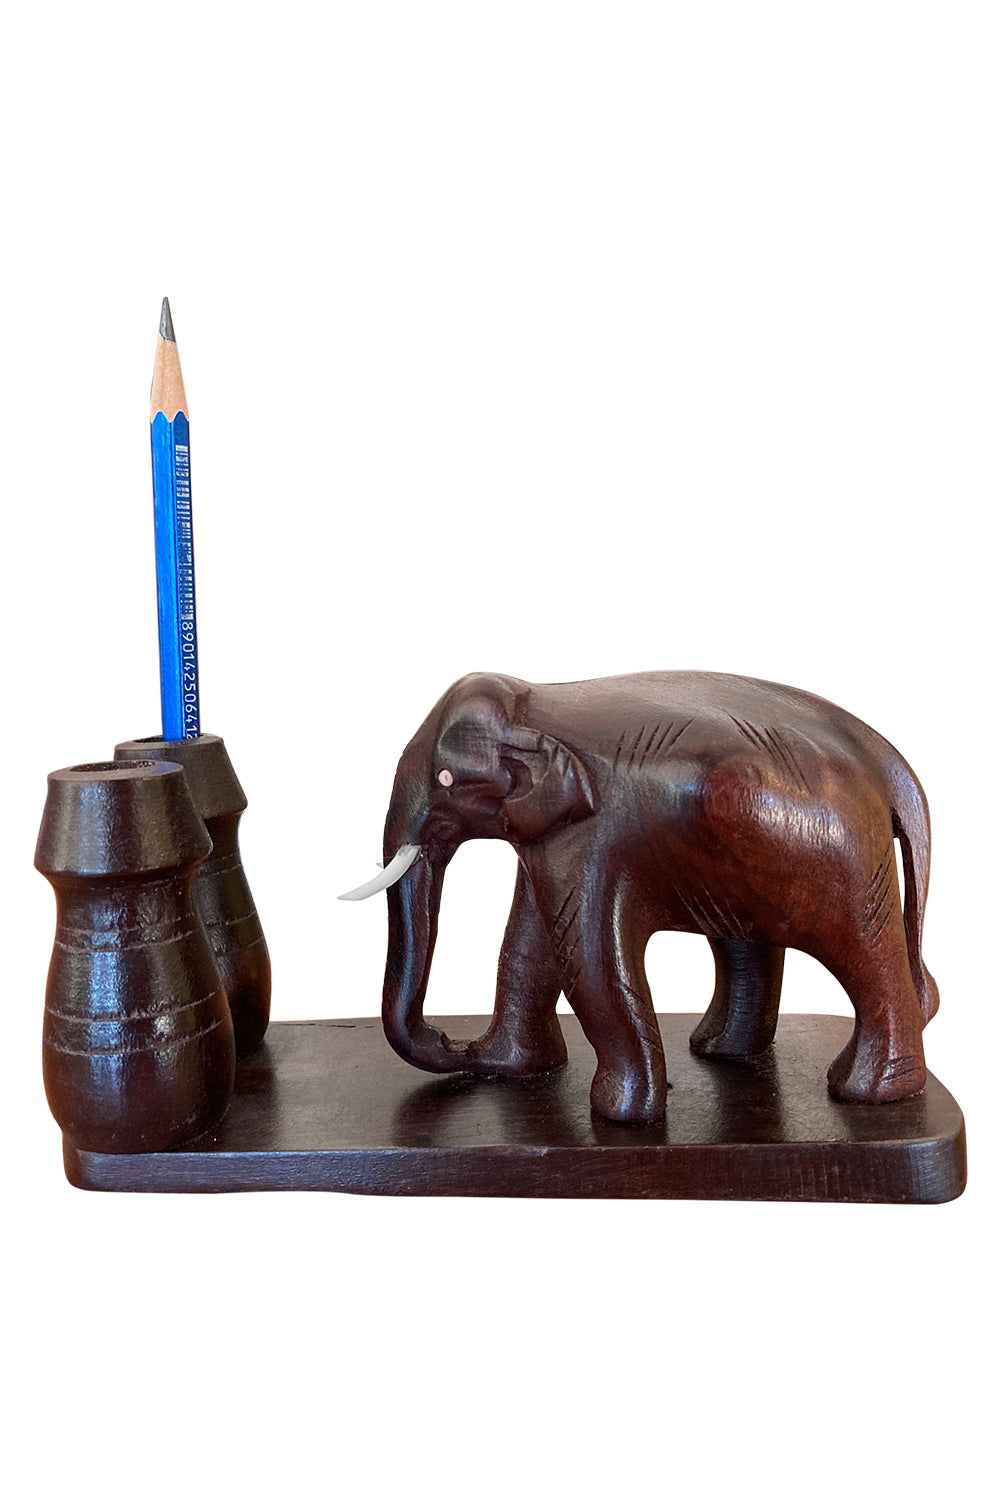 Southloom Handmade Elephant with Pen Holder Handicraft 3 inches (Carved from Mahogany Wood)